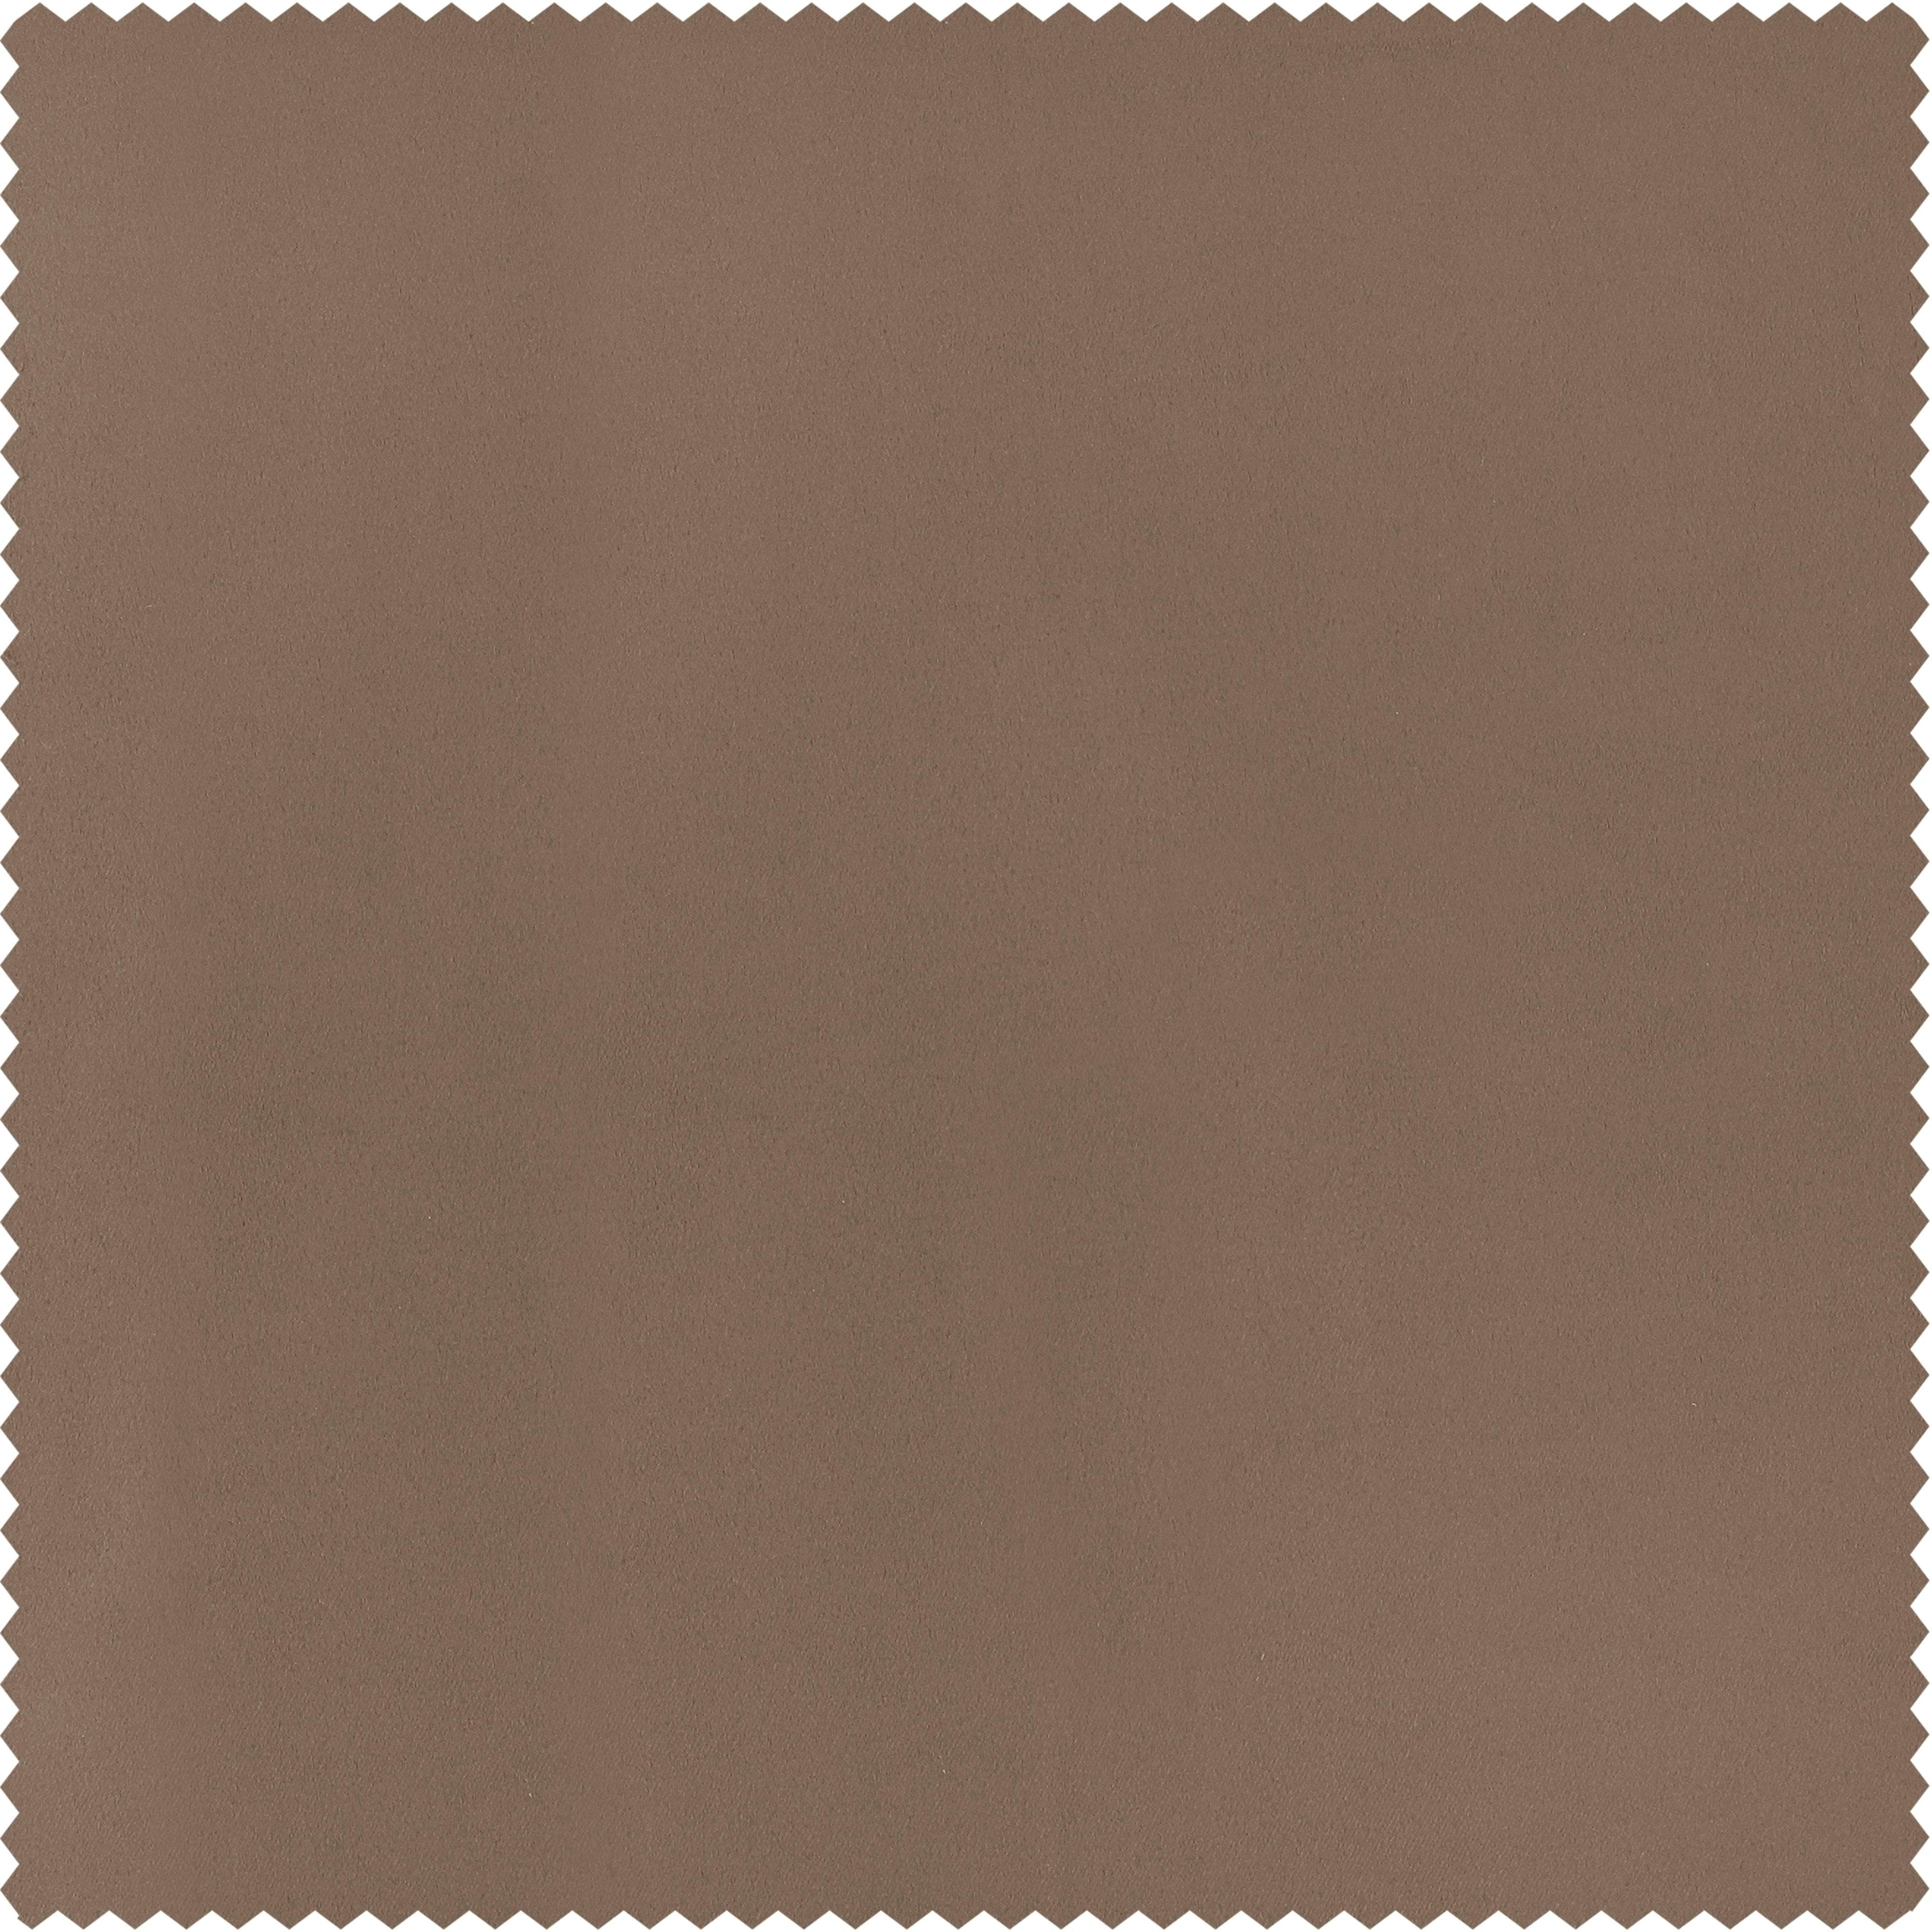 Formal Taupe Solid Polyester Swatch